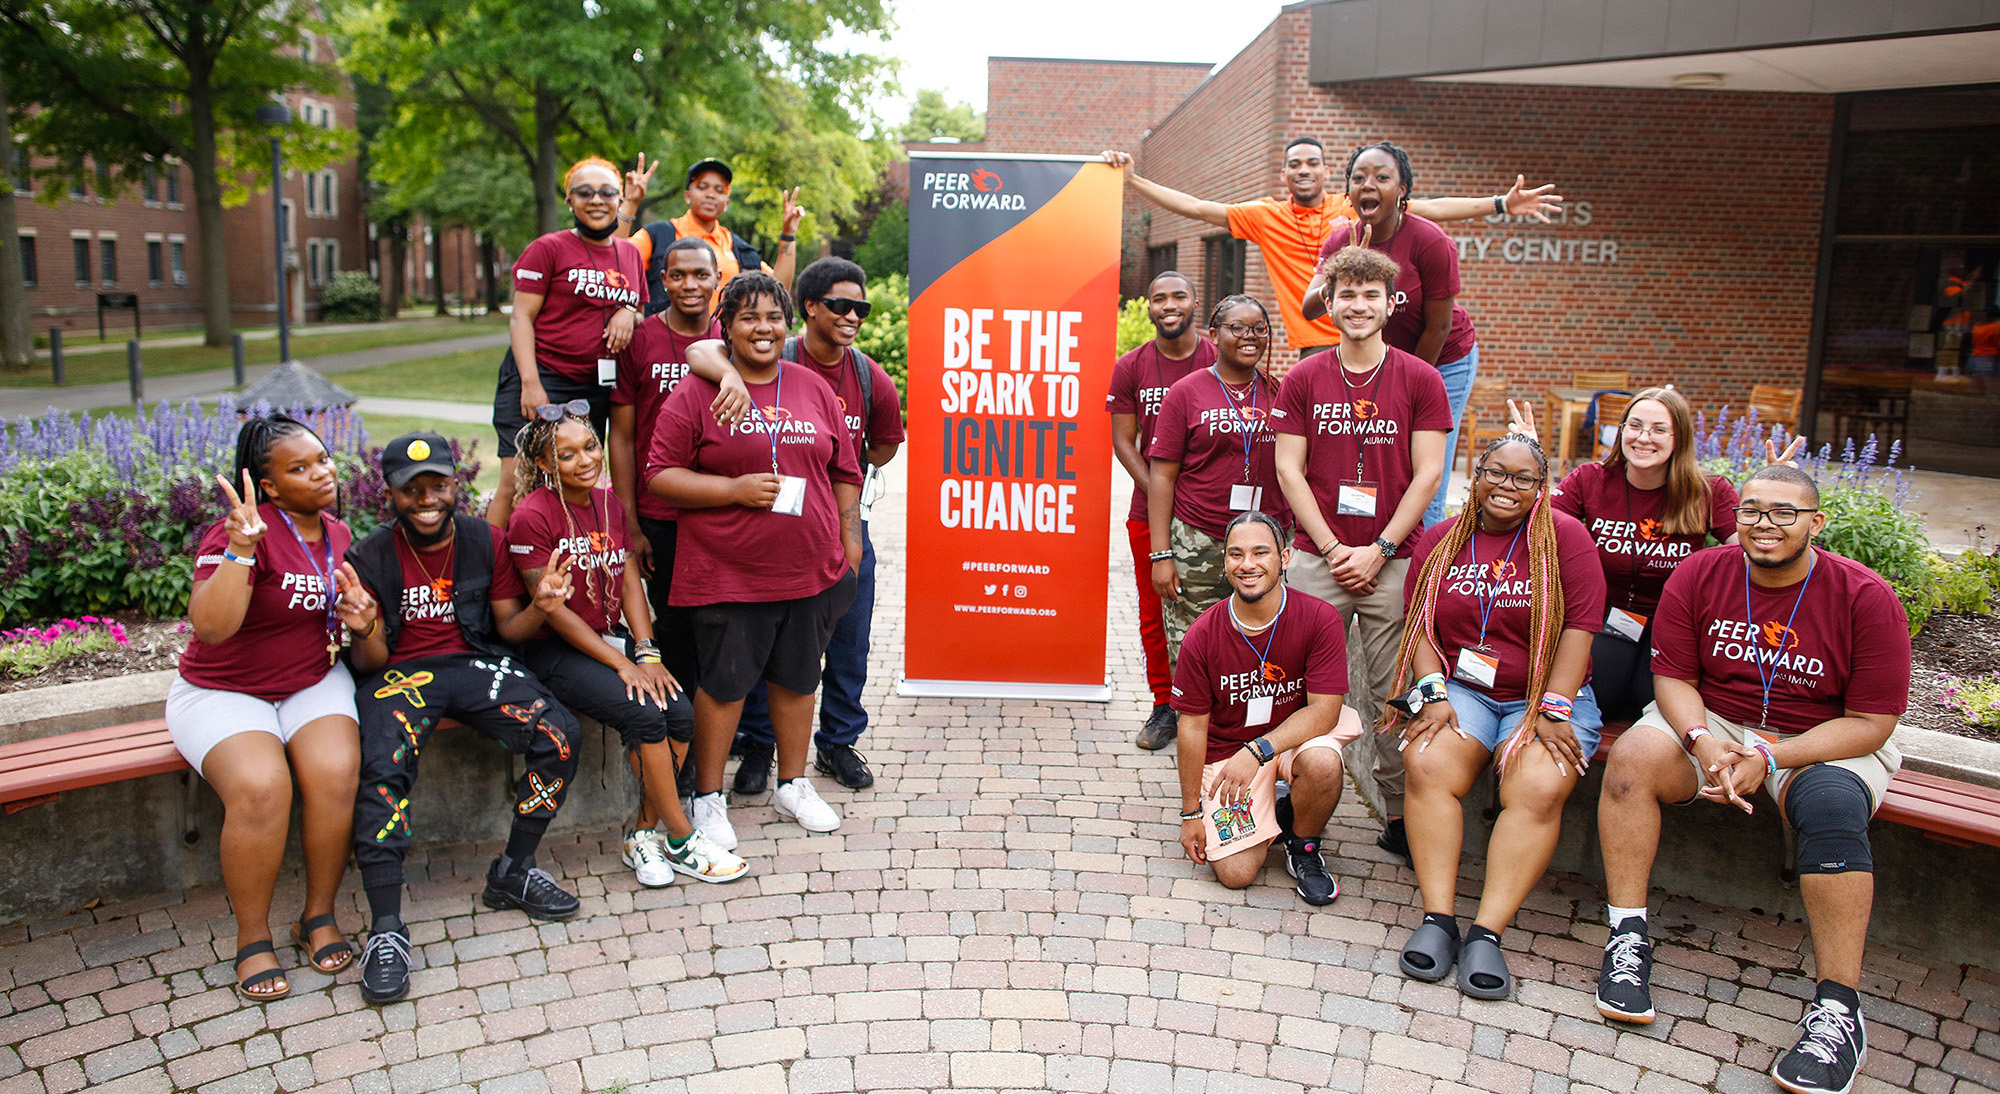 be the spark to ignite change poster and group of excited alumni